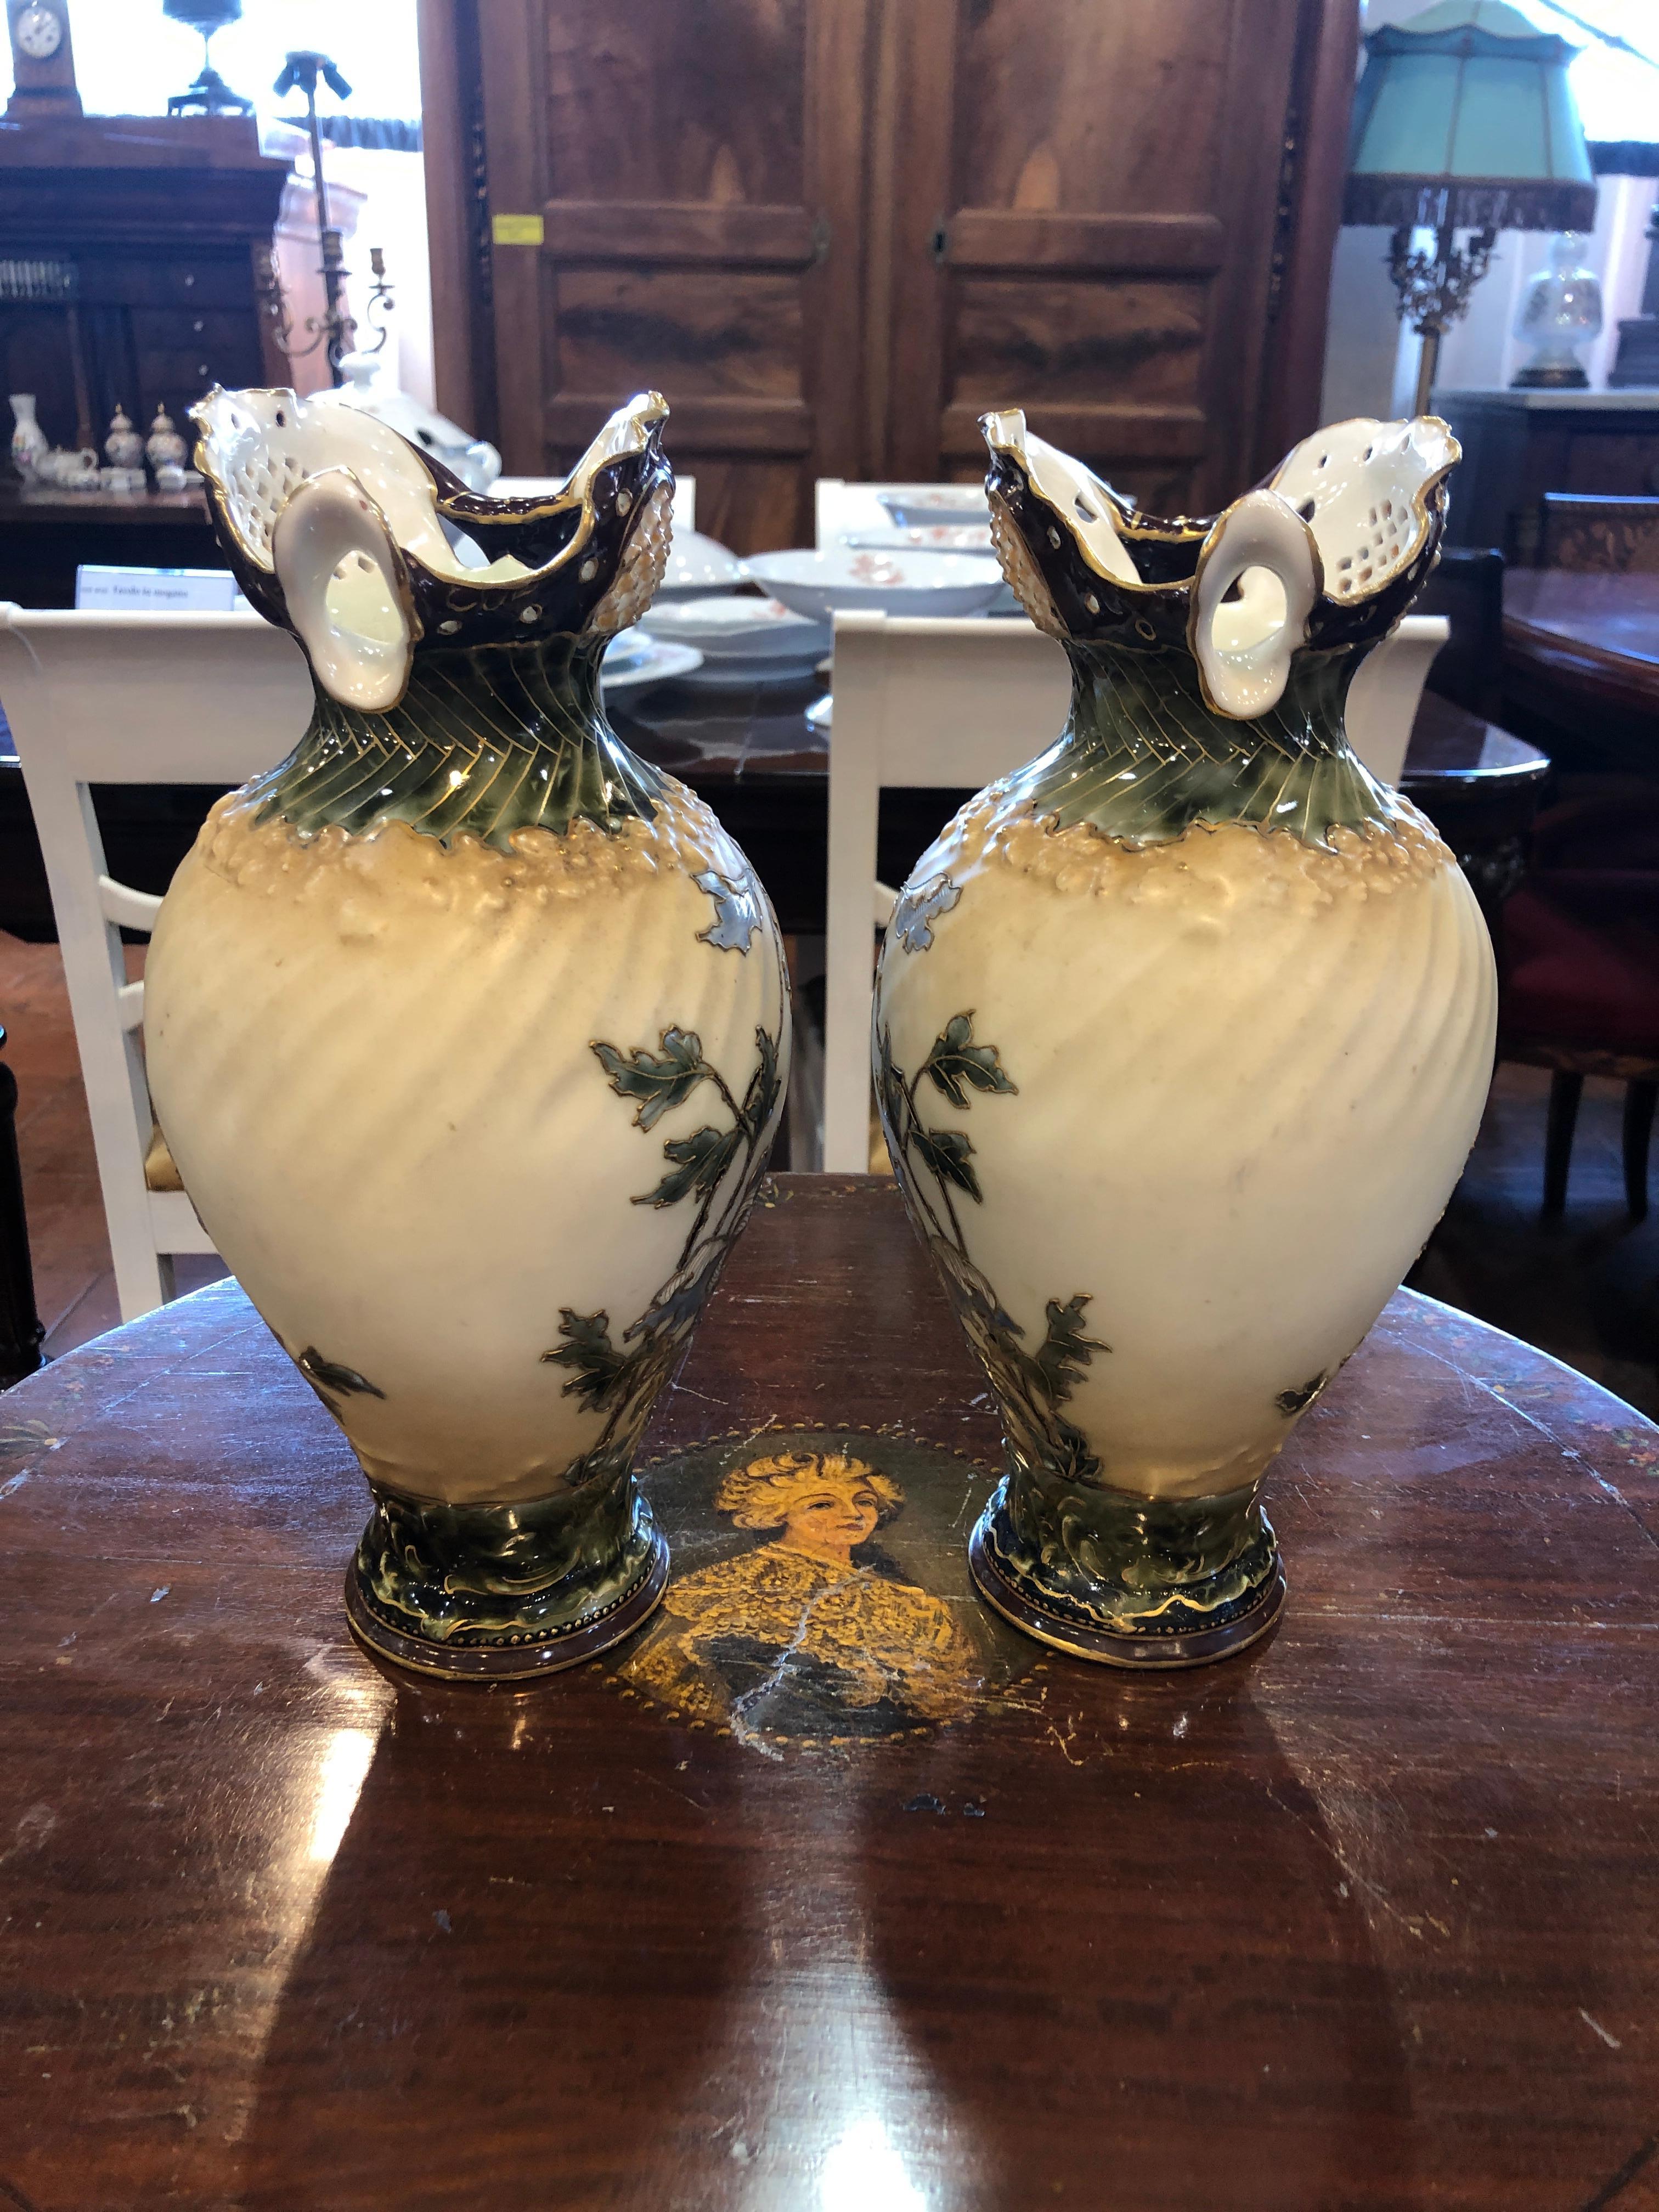 Pair of Austrian Pitchers signed EV Turn Vienna, circa 1880. In porcelain and painted with floral motifs, some parts of the flowers are in relief. The author is Ernst Wahliss from Vienna. His Vienna store was established in 1863. His business was so